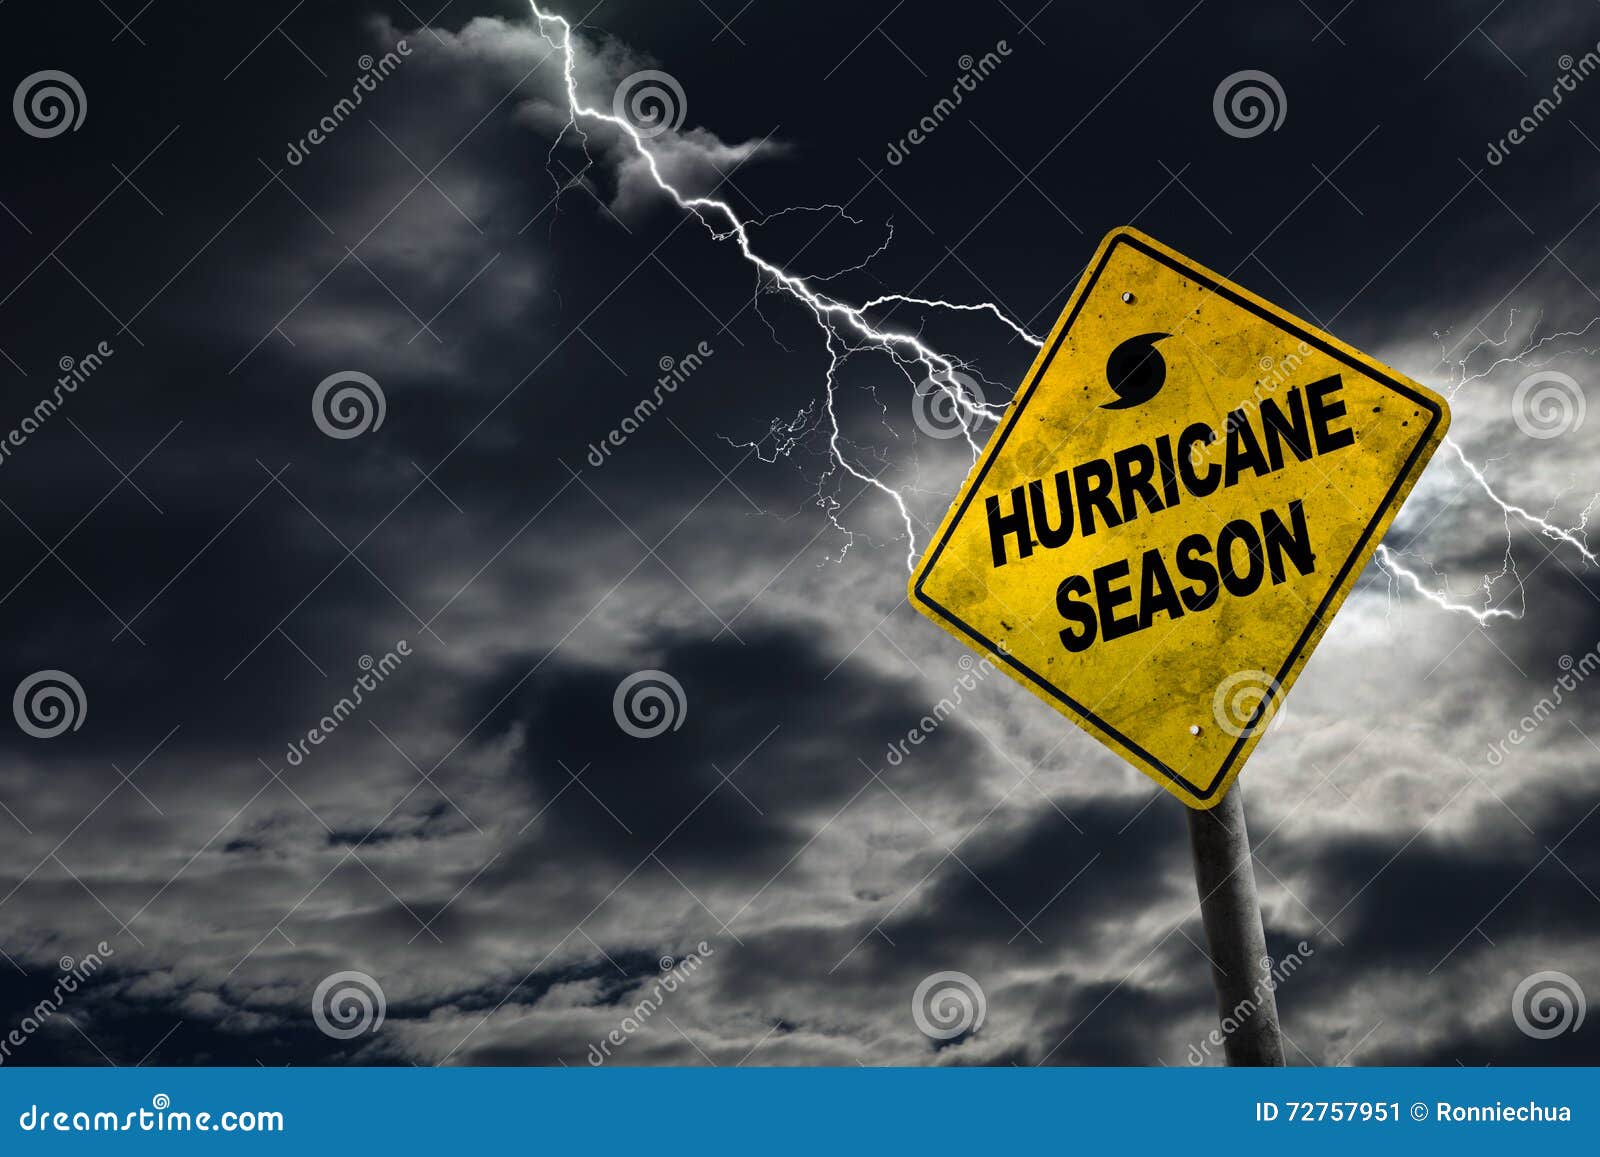 hurricane season sign with stormy background